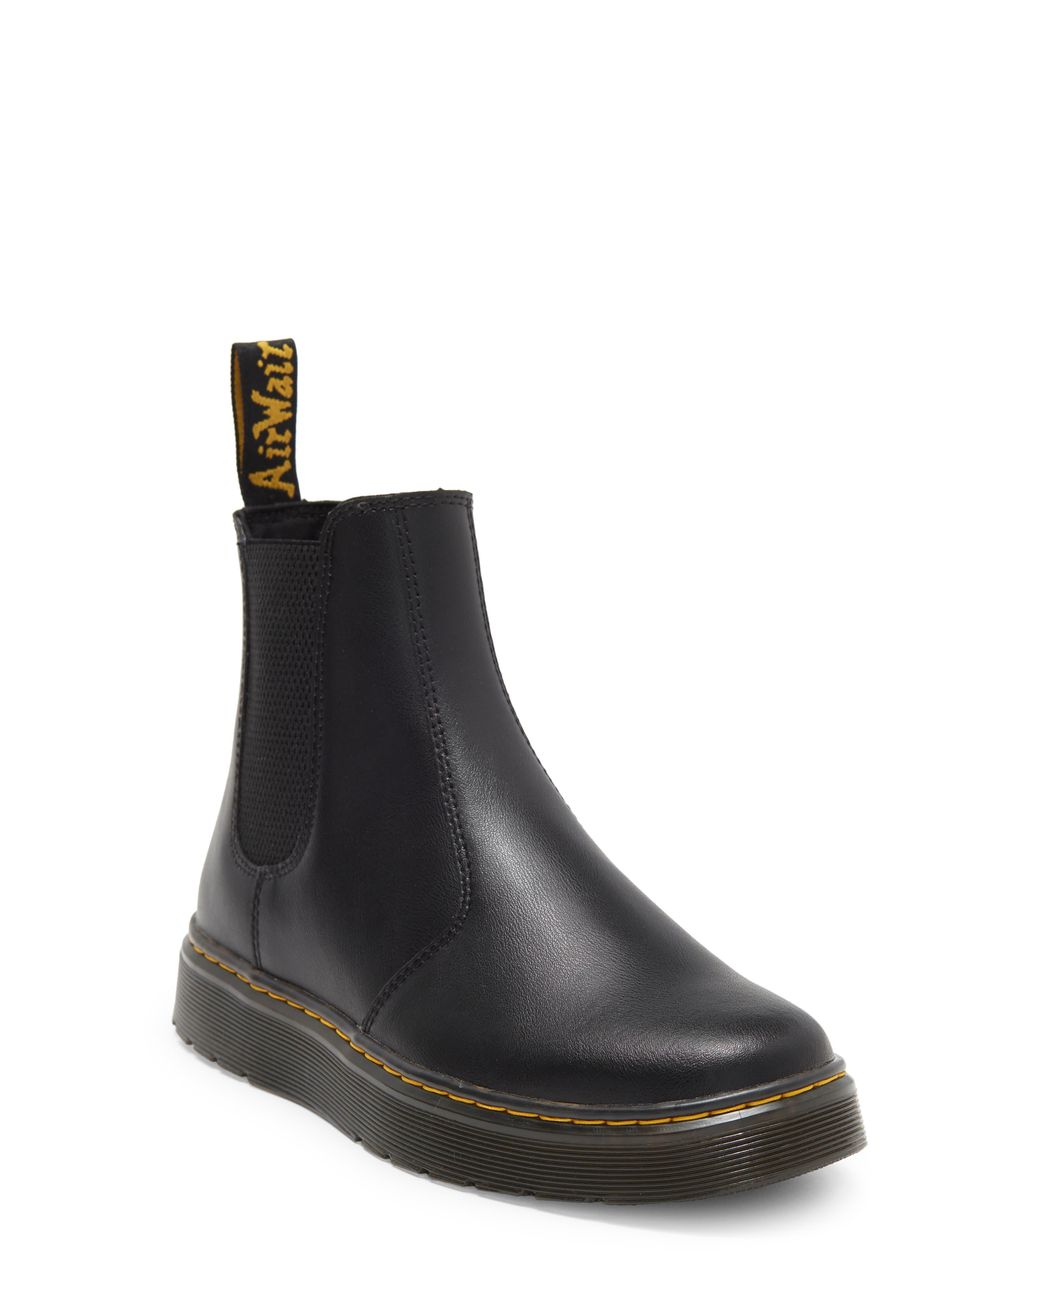 Dr. Martens Dorian Chelsea Leather Boot in Black | Lyst